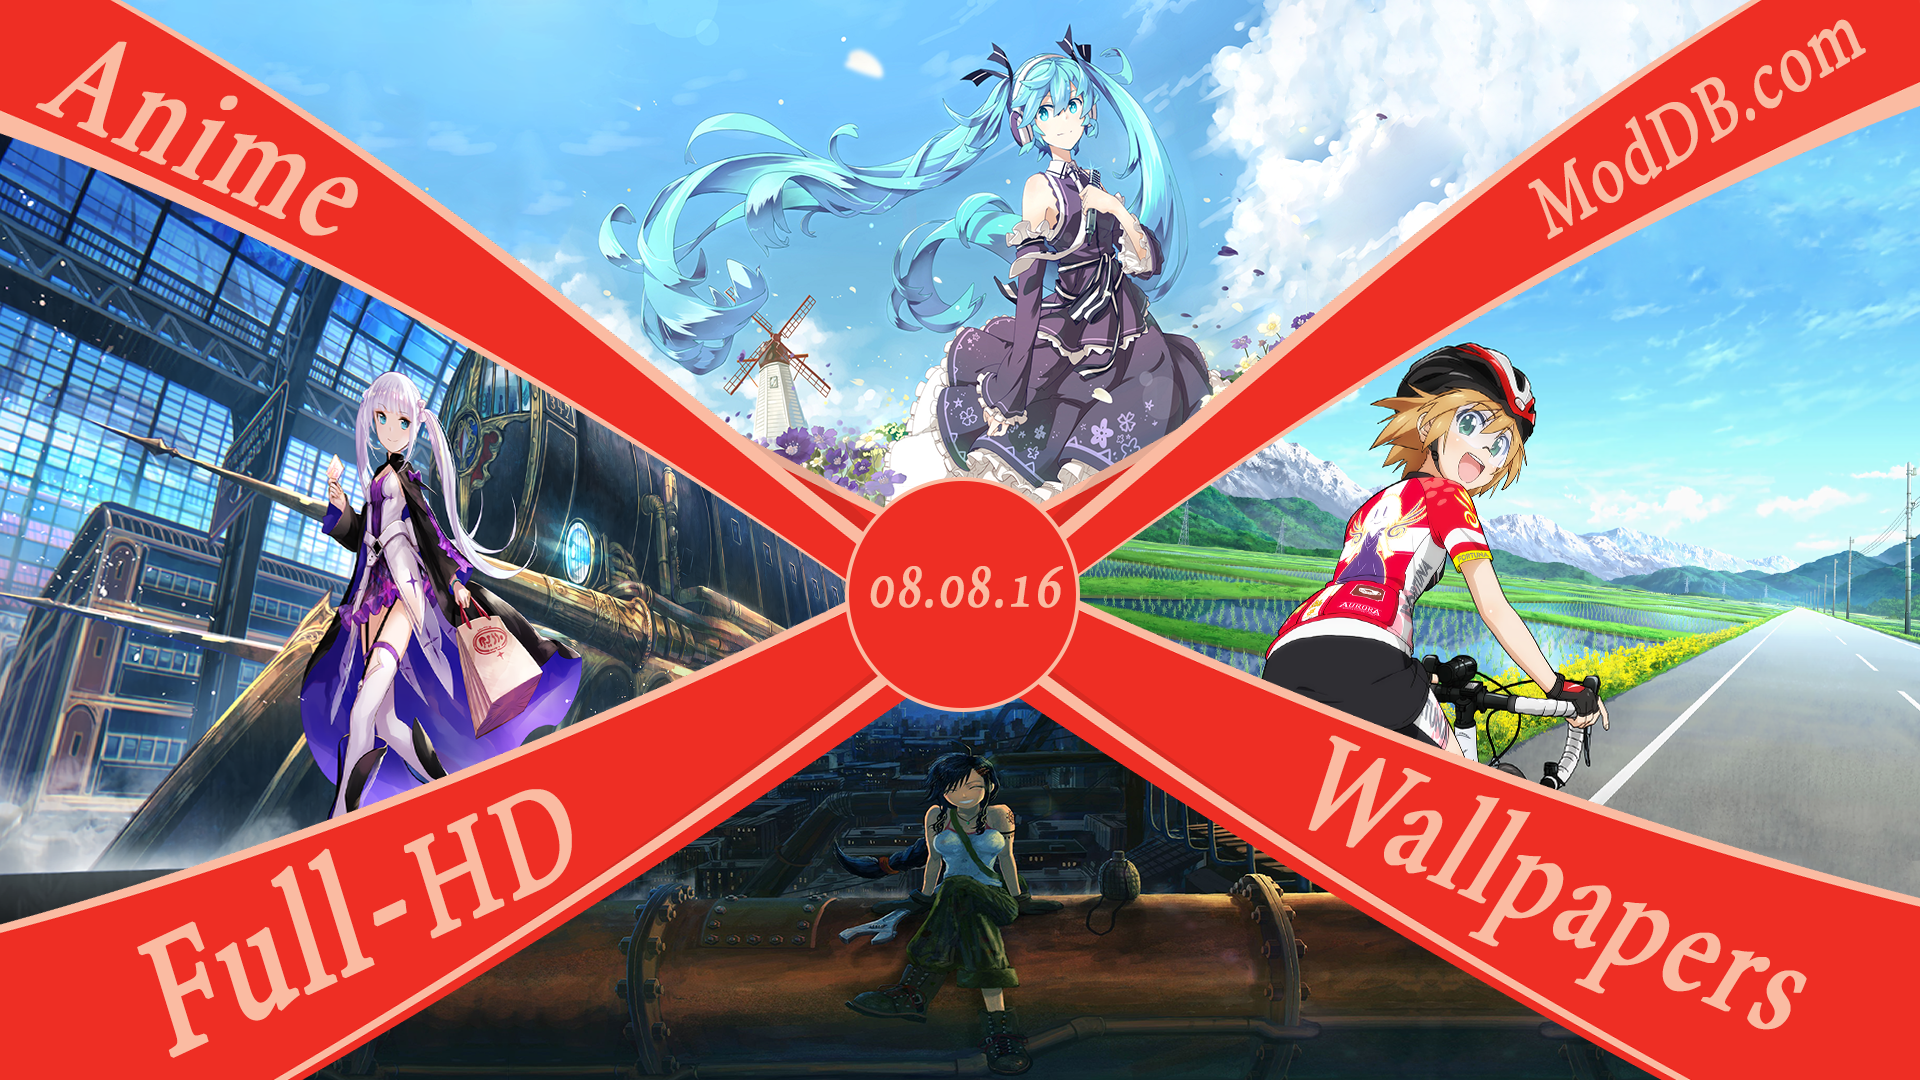 Old Anime Wallpaper's (Full-HD) - 18.08.14 file - IndieDB